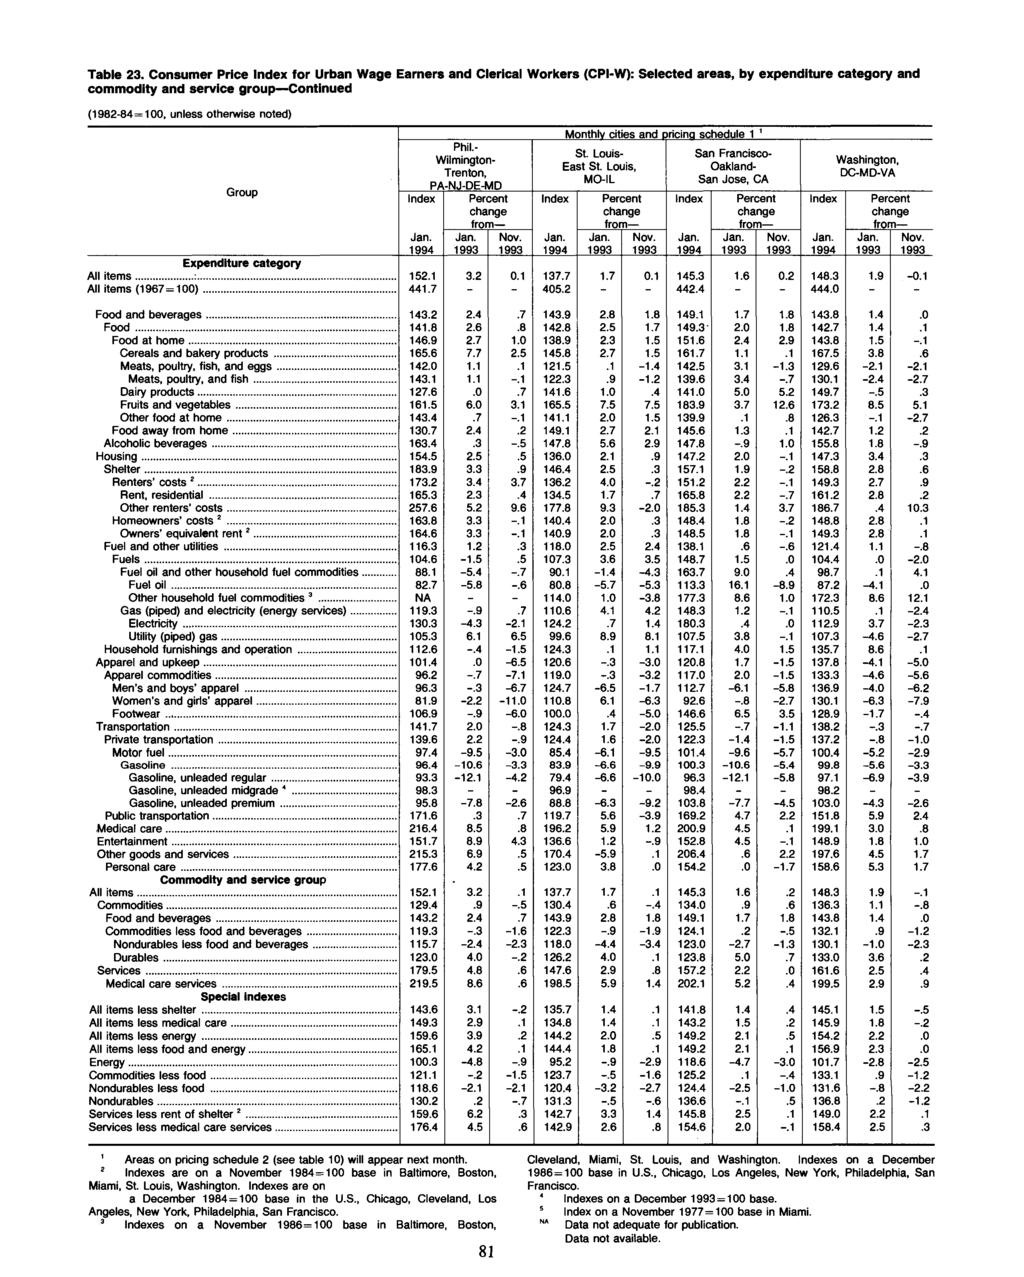 Table 23. Consumer Price for Urban Wage Earners and Clerical Workers (CPI-W): Selected areas, by expenditure category and commodity and service group Continued Group Expenditure category All items...:... All items (1967=100).